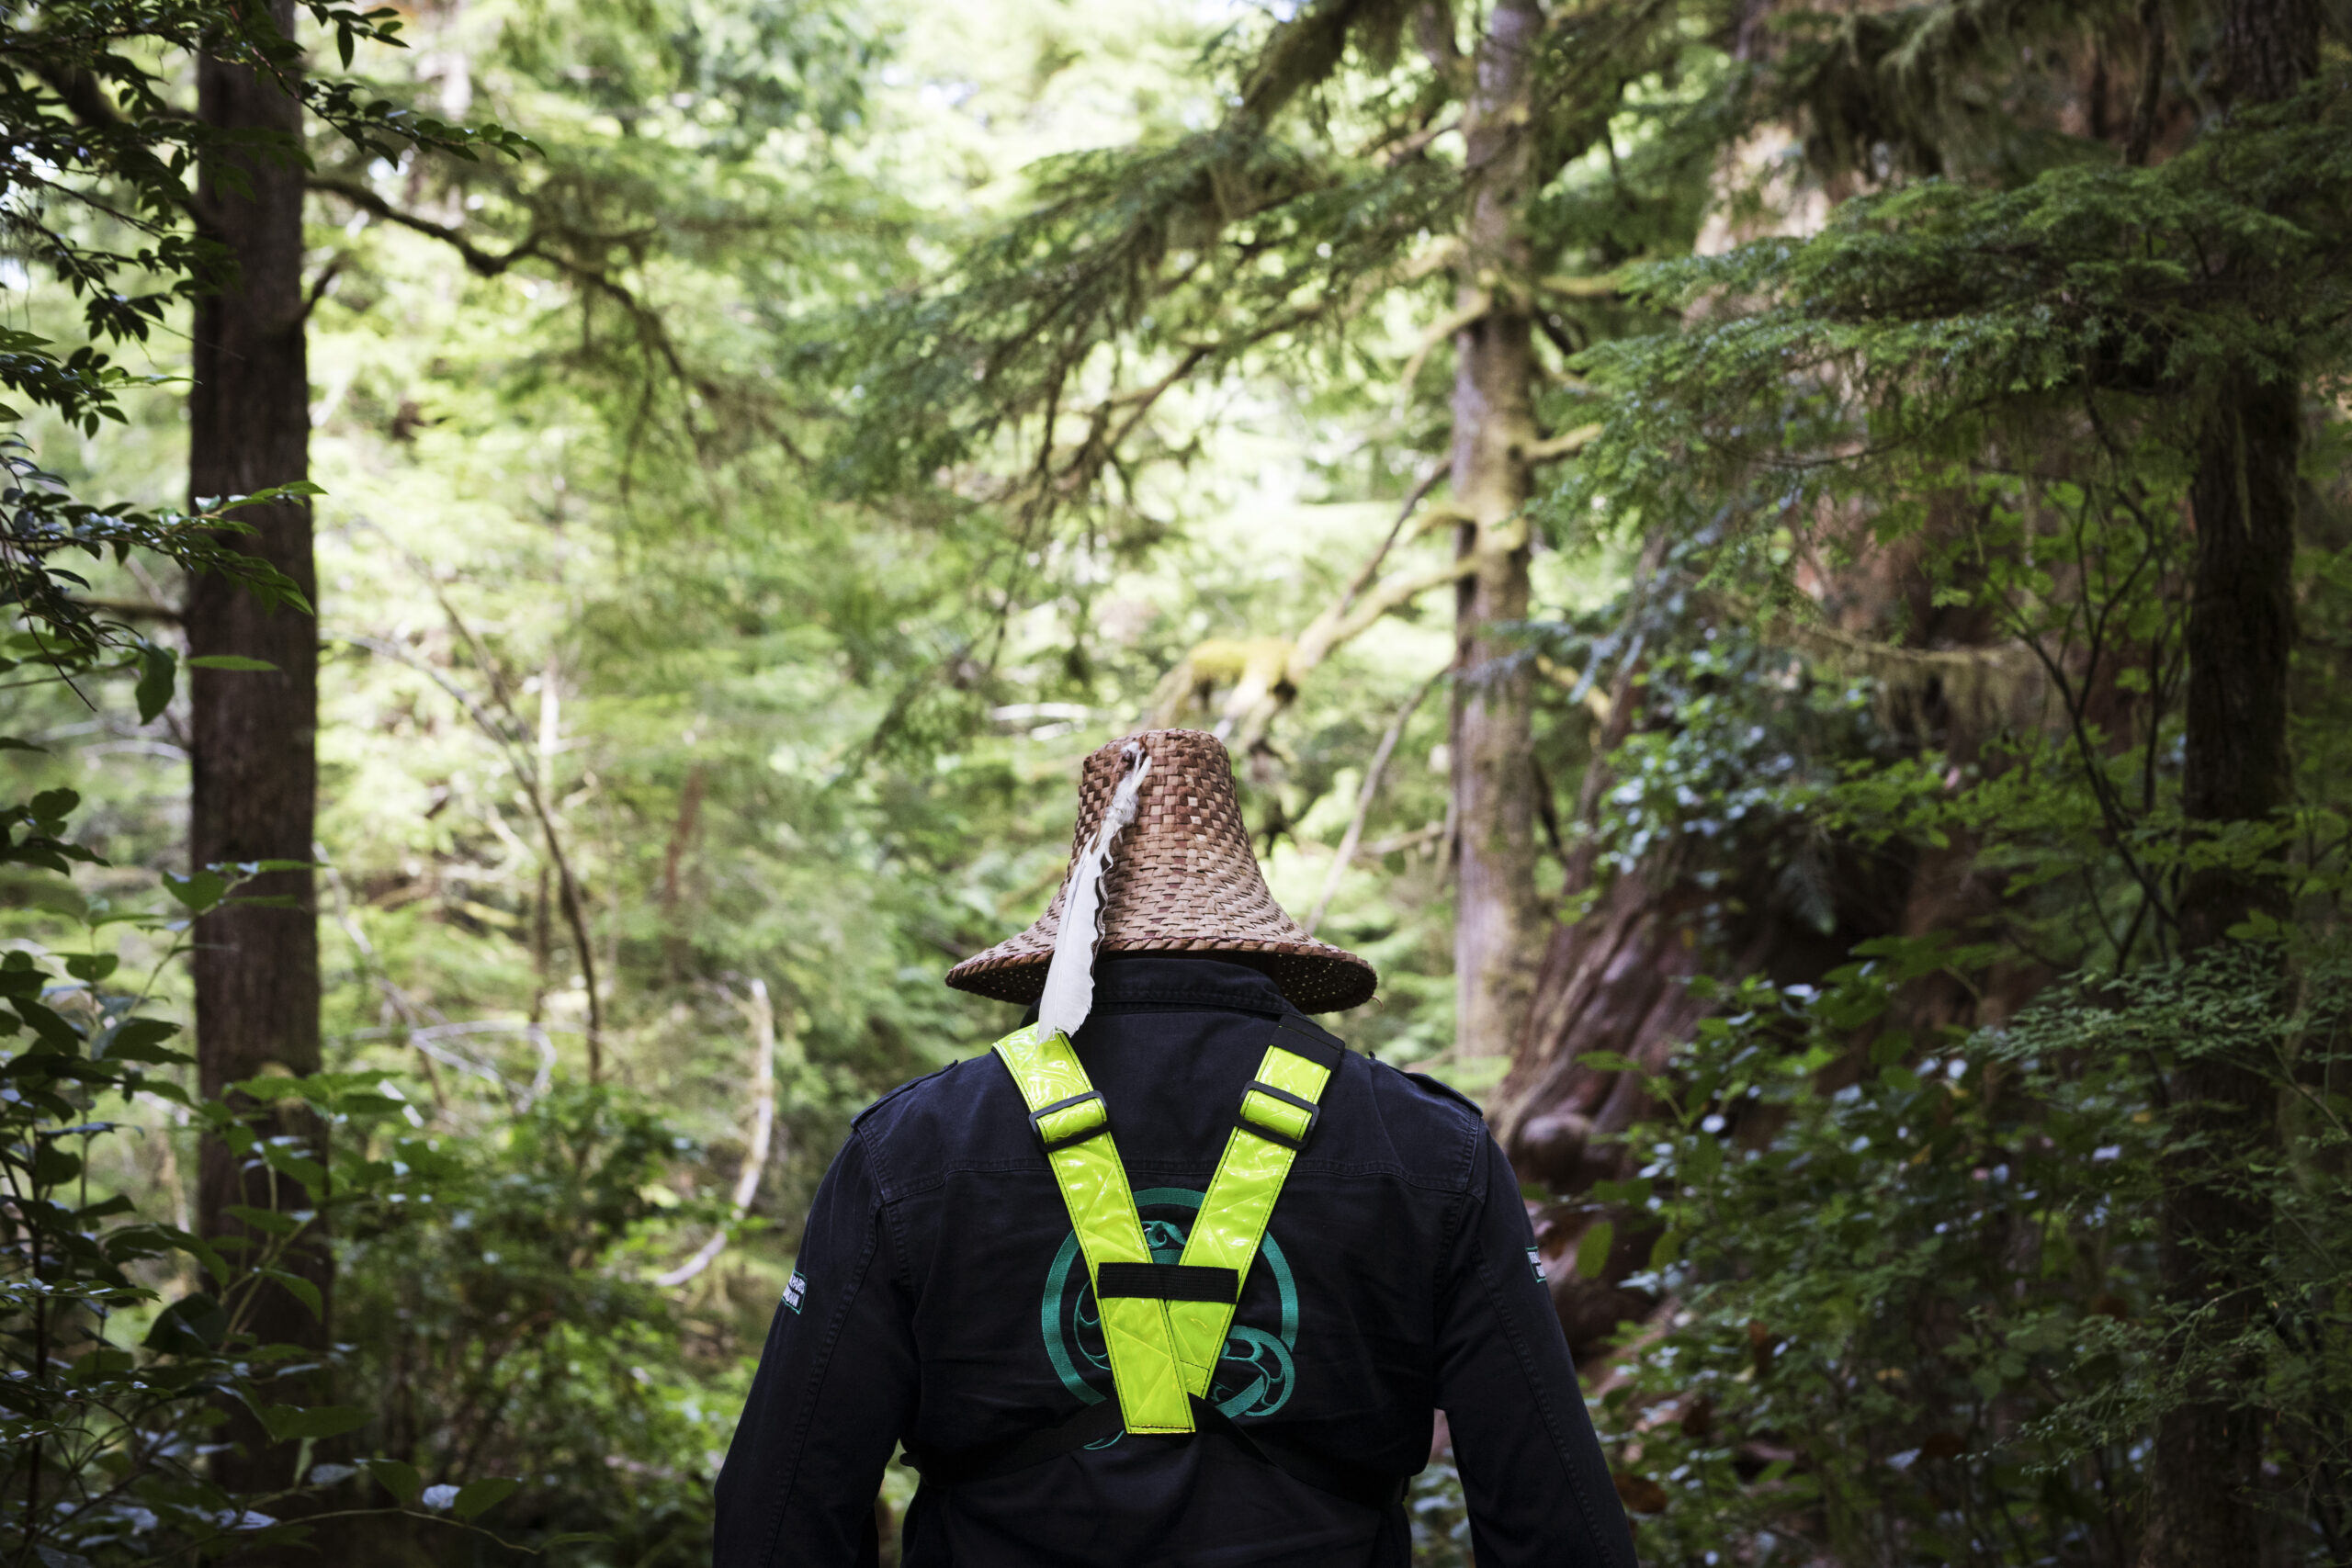 Tla-o-qui-aht First Nation Natural Resources Manager Saya Masso walks along the Big Tree Trail on Meares Island, near Tofino